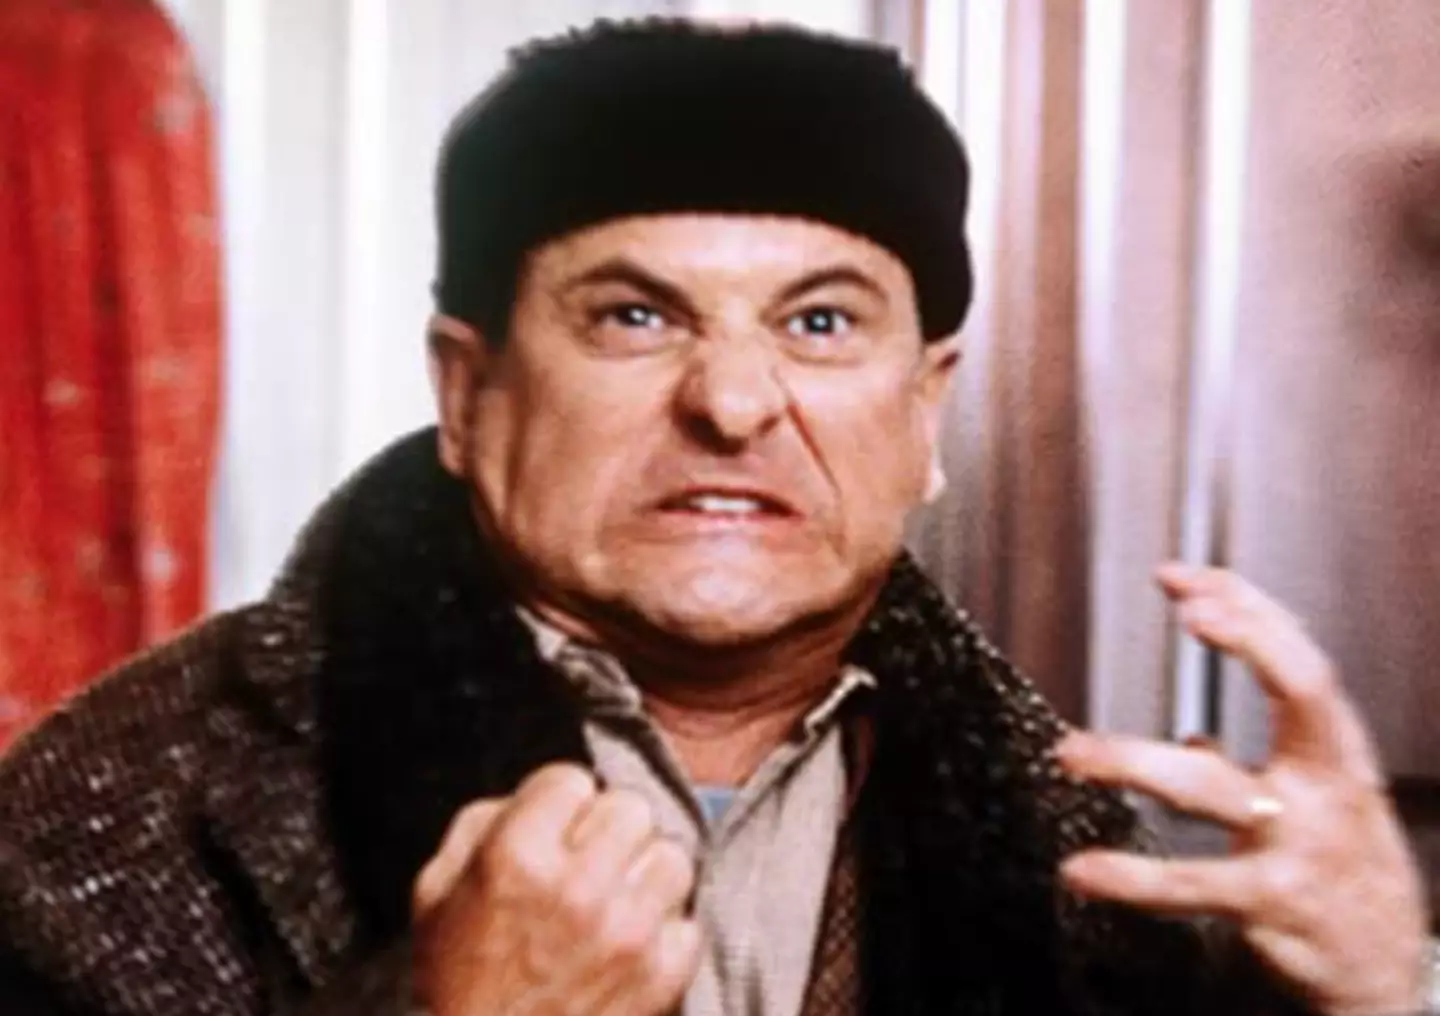 Pesci plays Harry in Home Alone.